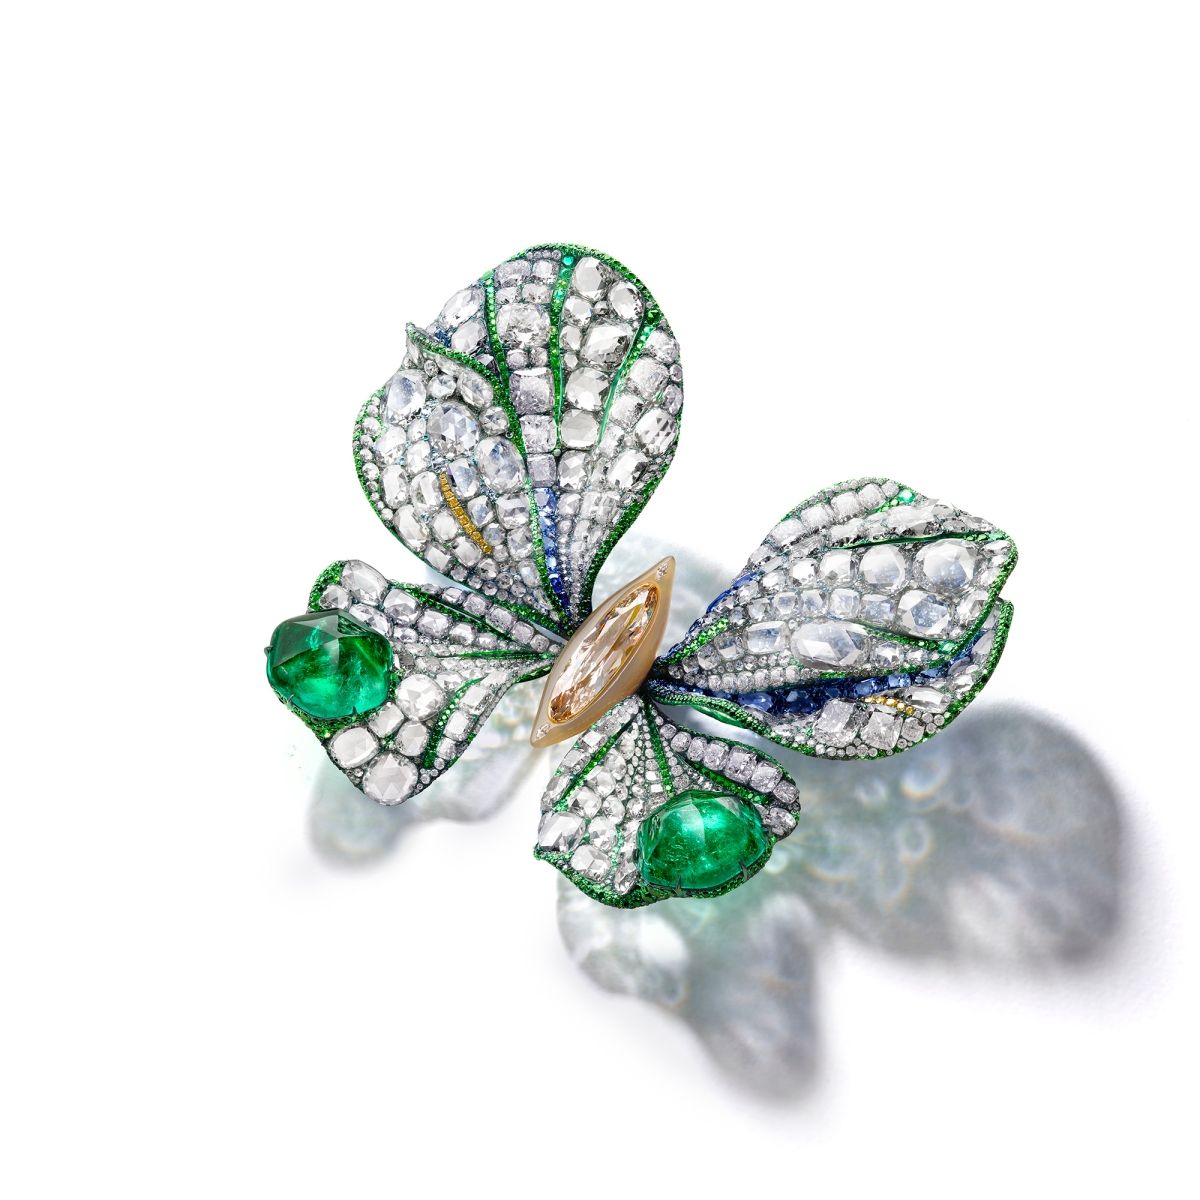 Mellerio or Boucheron? We answer your Bling Empire jewellery questions